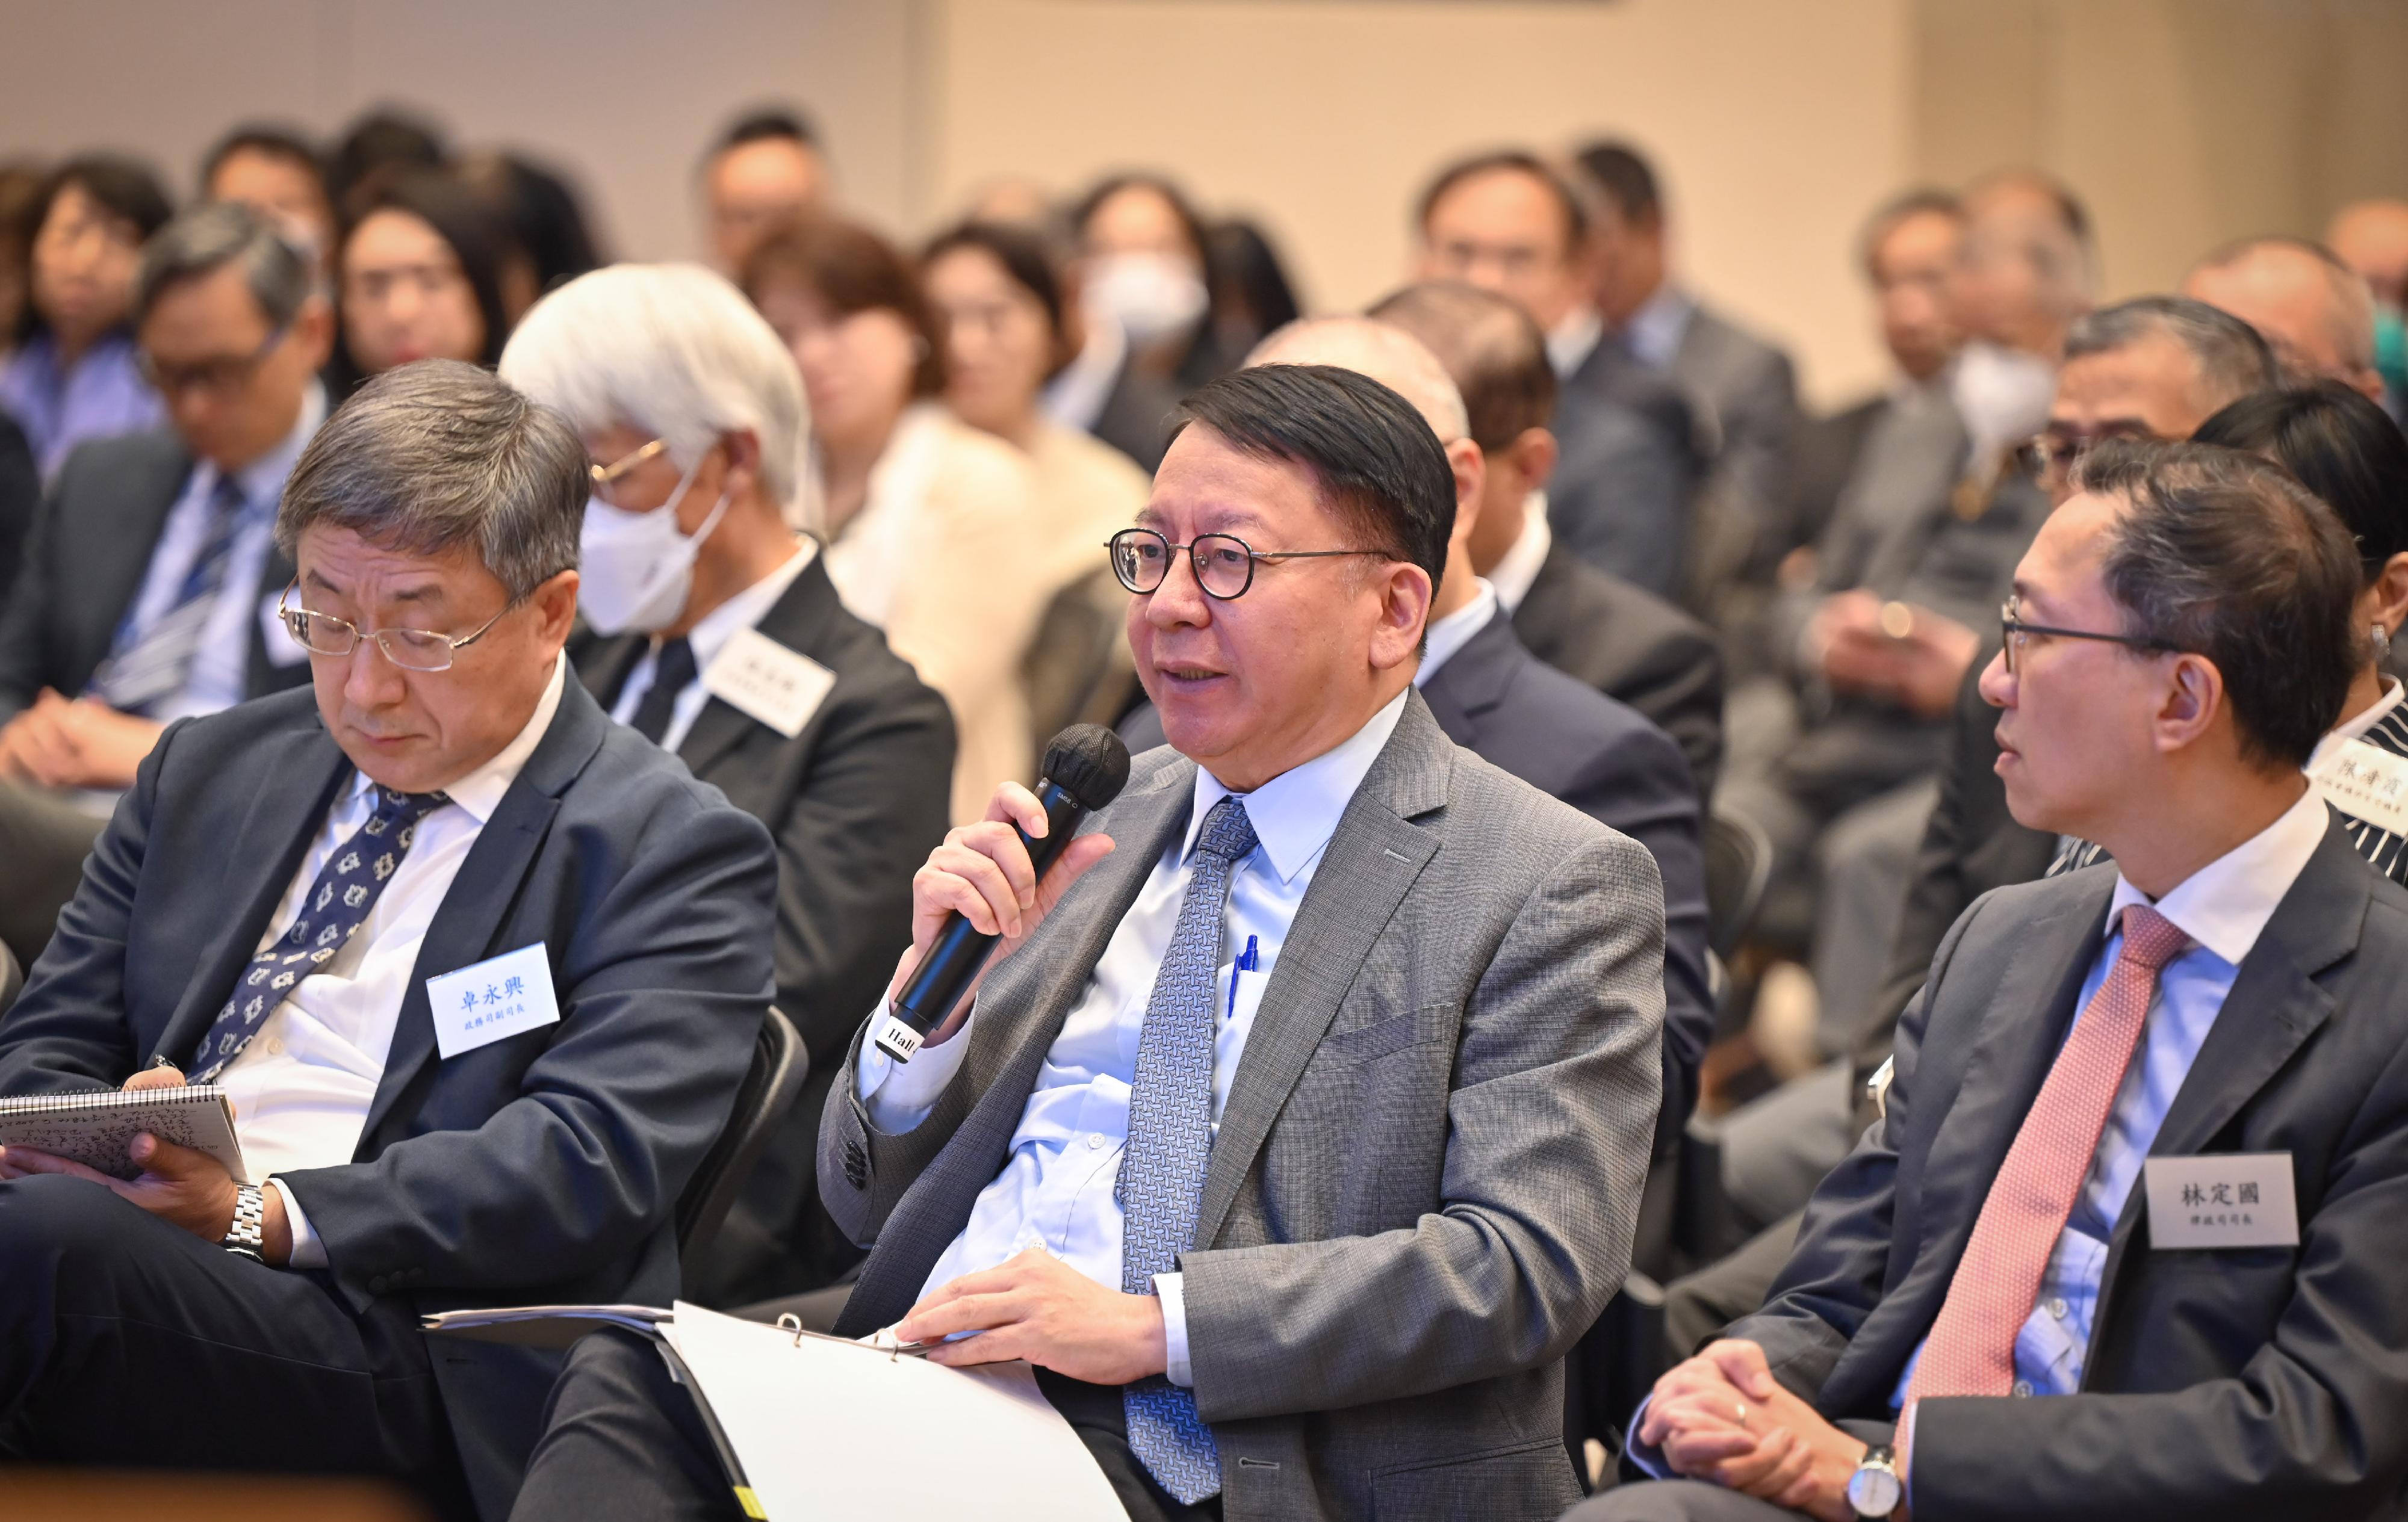 The Hong Kong Special Administrative Region Government today (March 24) held a sharing session on the spirit of "two sessions" at the Central Government Offices. Photo shows the Chief Secretary for Administration, Mr Chan Kwok-ki, sharing his views.